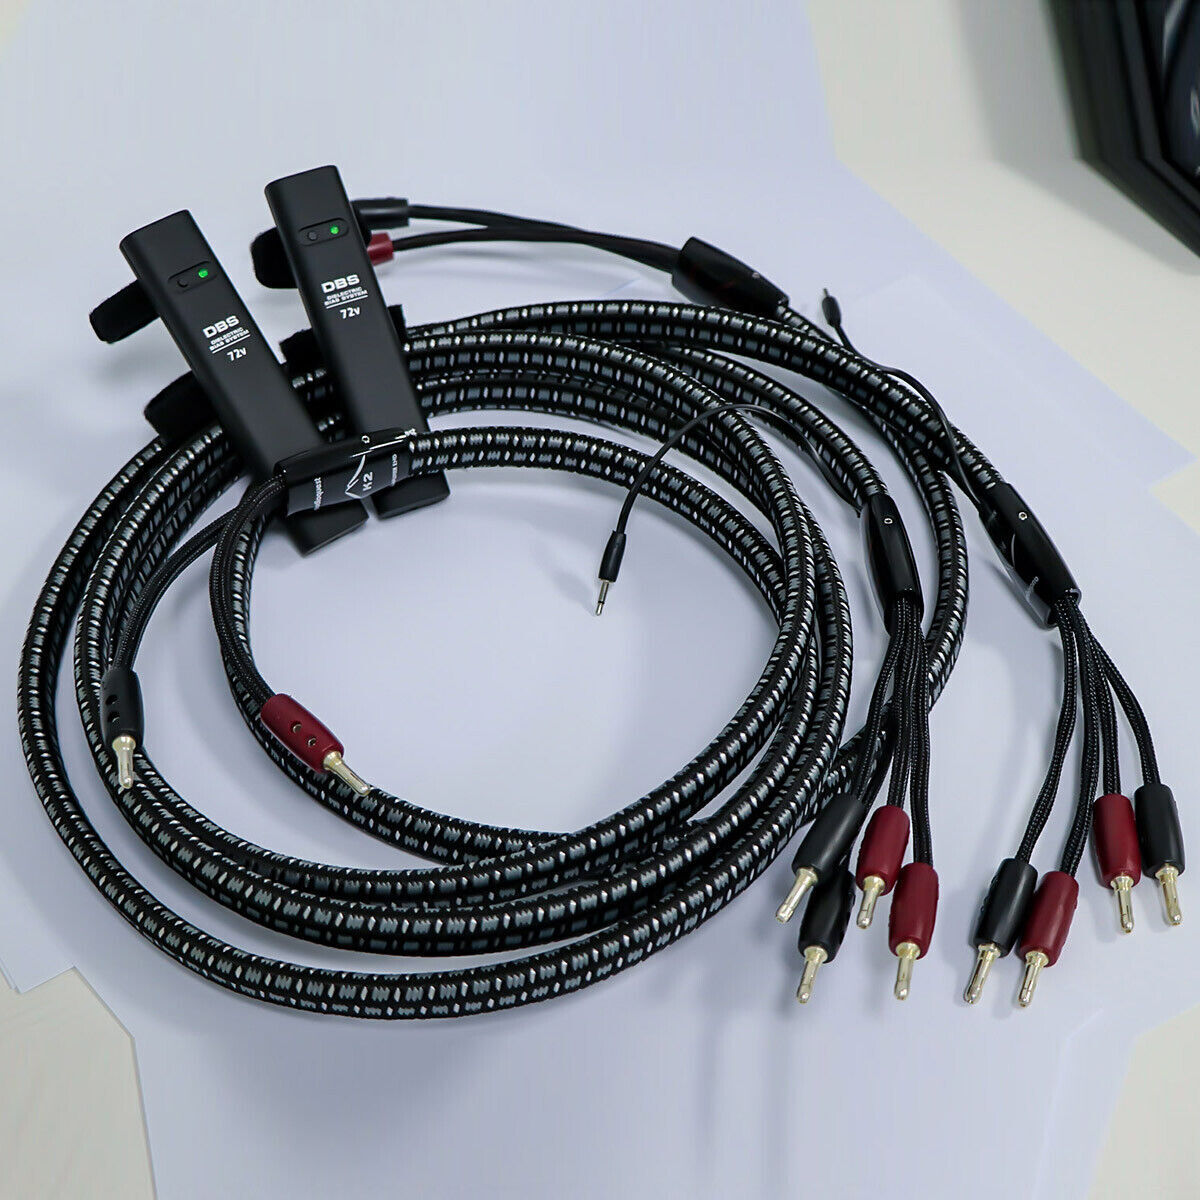 Pair HiFi K2 Bi-wire/Single-wire with 72V DBS Speaker Cables+Silver Banana Plugs